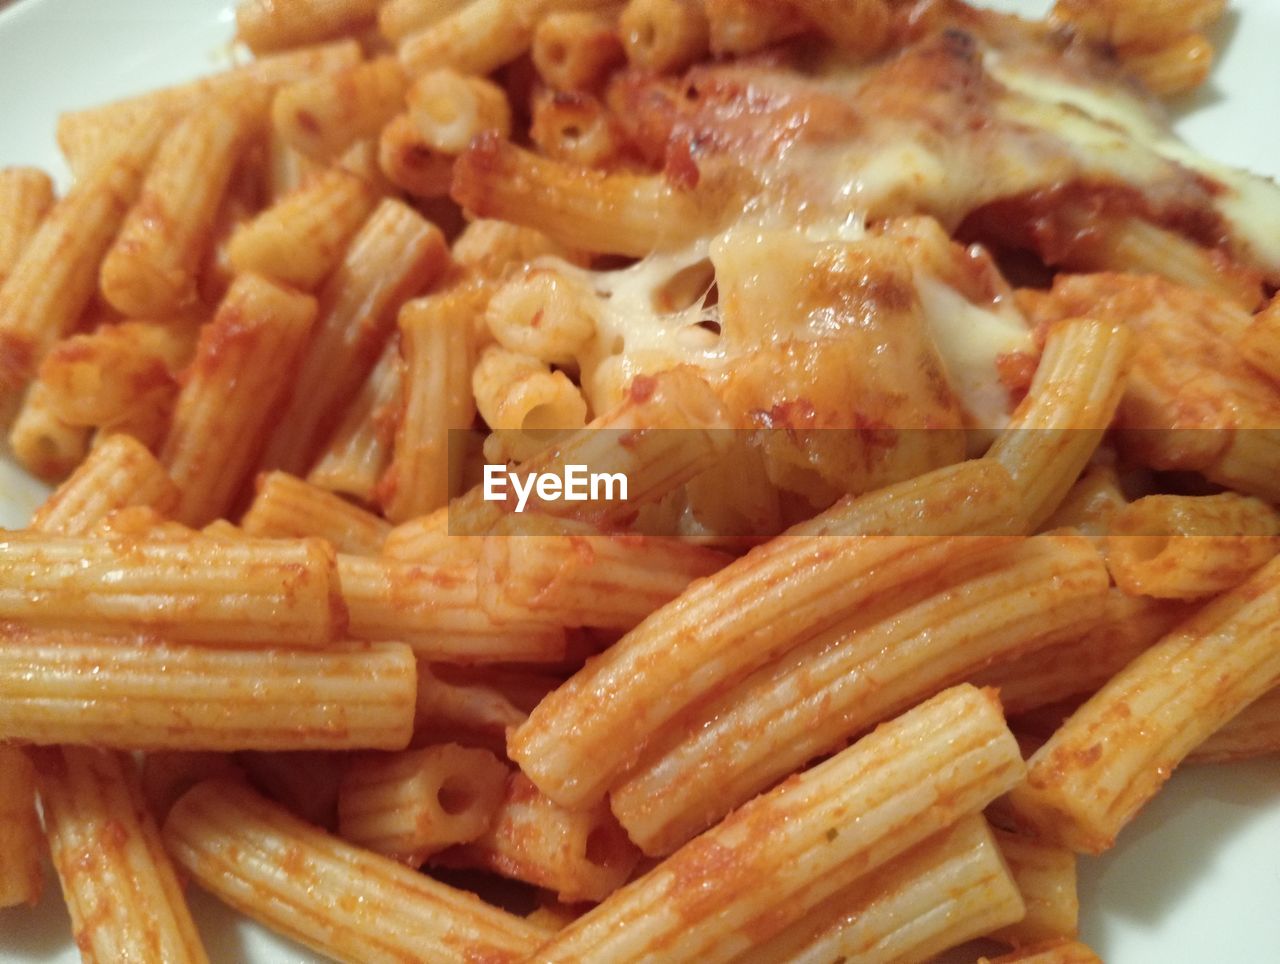 penne, food, food and drink, italian food, pasta, penne alla vodka, freshness, fast food, cuisine, dish, pasta pomodoro, indoors, close-up, pici, carbonara, produce, spaghetti, no people, still life, wellbeing, healthy eating, plate, french fries, high angle view, vegetable